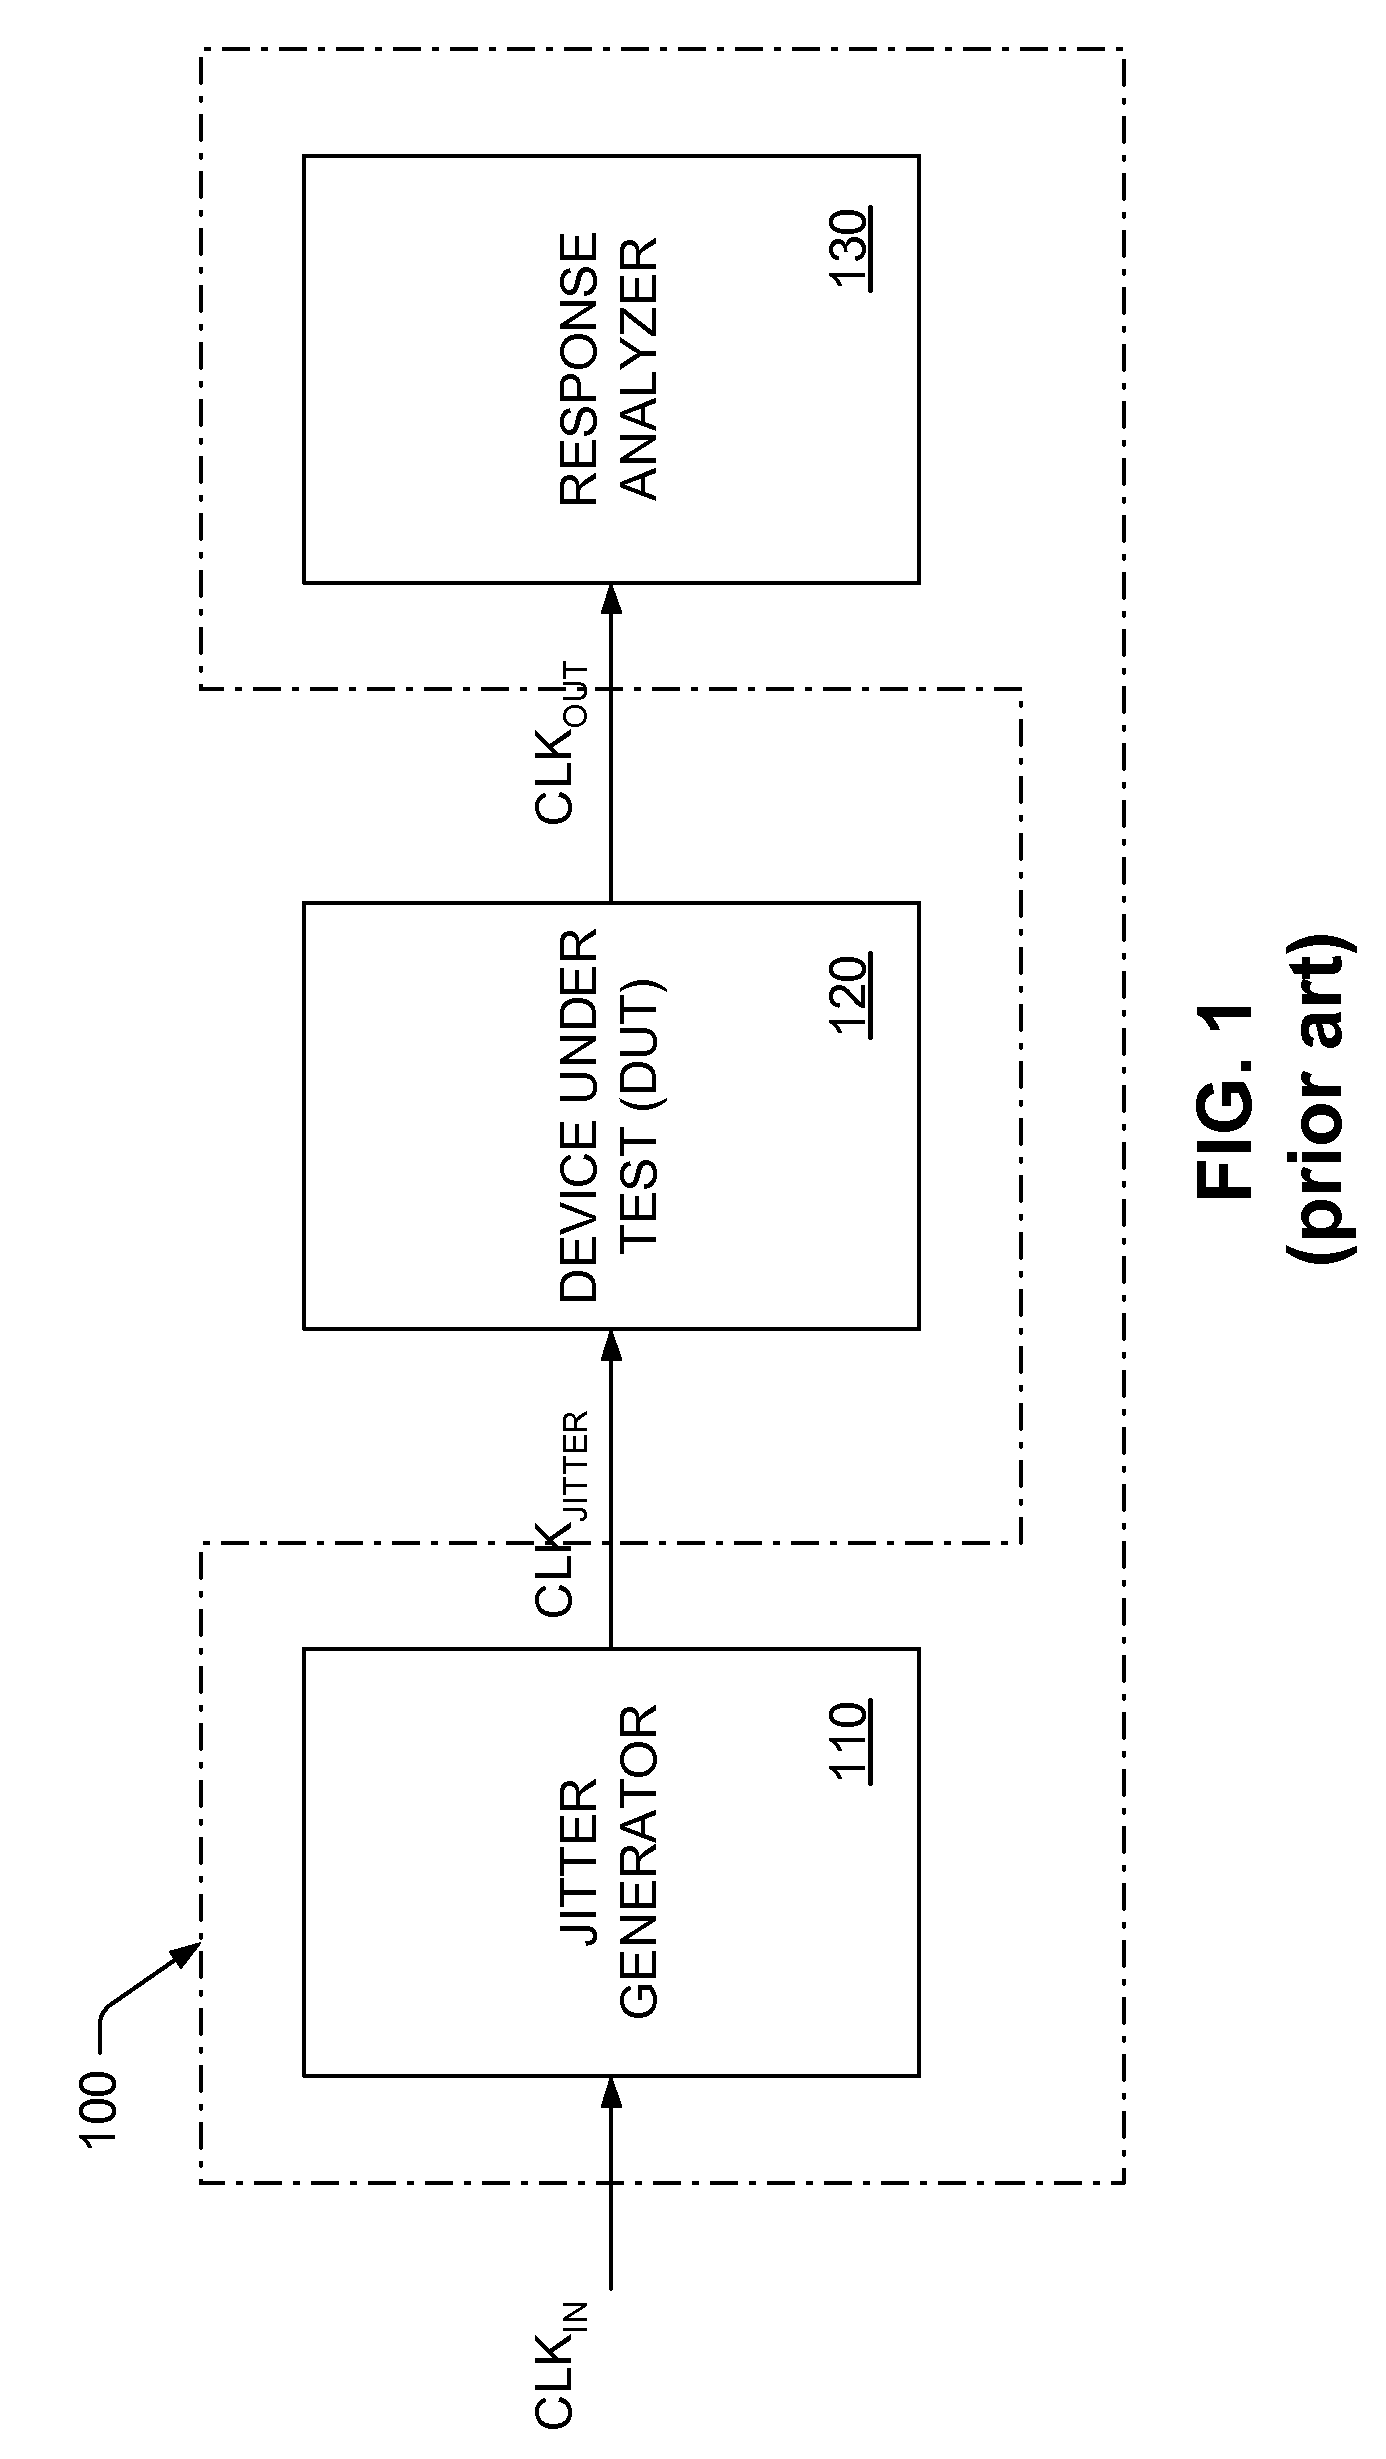 Test Circuit, System, and Method for Testing One or More Circuit Components Arranged upon a Common Printed Circuit Board